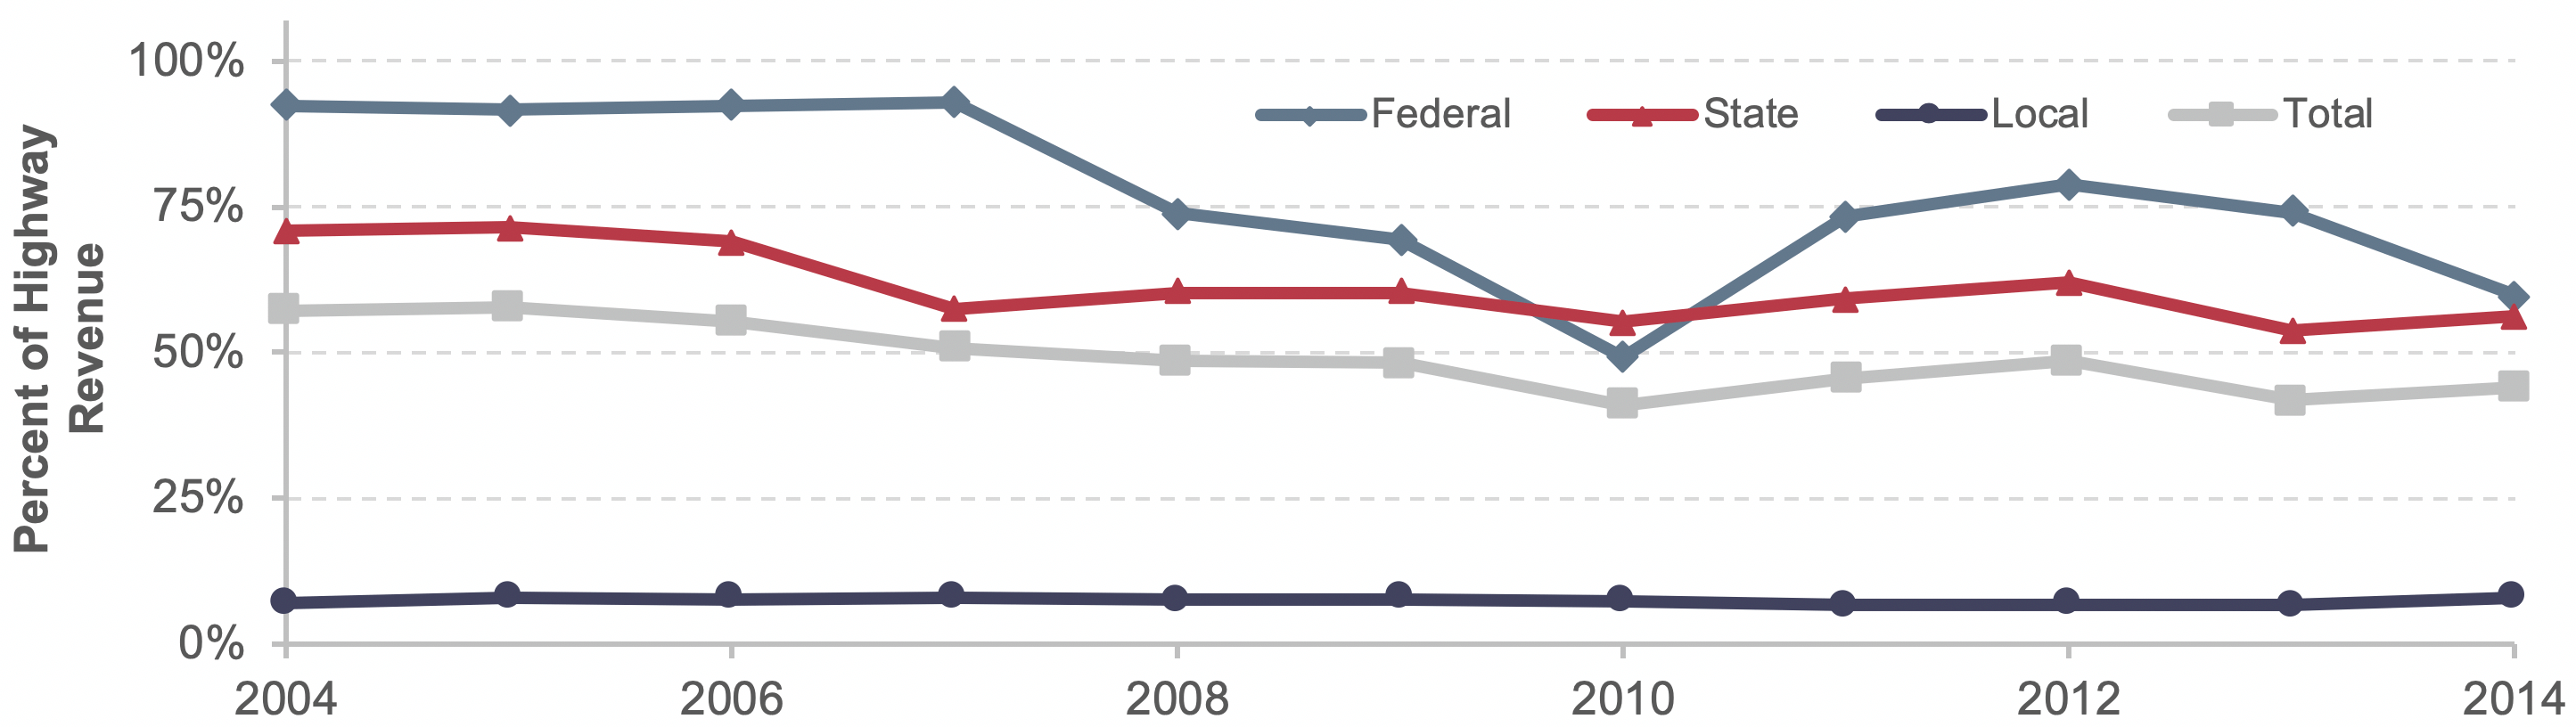 A line chart shows the percentage change in revenue derived from user charges for four levels of government (federal, state local, and total) from 2004 through 2014. The percentage of revenue from user charges for federal highways starts at 92.4 percent in 2004, maintains this value through 2007, decreases sharply to a low of 49.1 percent in 2010, rises to 78.9 percent in 2012, and then decreases slightly to 59.8 percent in 2014. The percentage for state government revenues begins at 70.8 percent in 2004, stays roughly the same through 2006, decreases sharply to 57.6 percent in 2007, remains roughly constant through 2012 when it is 62.1 percent, then decreases to 53.9 percent in 2013, and finally increases to 56.4 percent in 2014. The percentage for local government revenues begins at 6.9 percent in 2004, increases to 7.9 percent in 2005, stays at roughly this value through 2009, then decreases to a series low of 6.6 percent in 2011, before rising to a final value of 8.0 percent in 2014. The percentage for total government revenues from user charges begins at 57.1 percent in 2004, decreases to a low of 41.1 percent in 2010, then increases to 48.6 percent in 2012, and then decreases sharply to 41.8 percent in 2013 before increasing to a final value of 44.1 percent in 2014. Sources: Highway Statistics, various years, Tables HF-10A and HF-10.